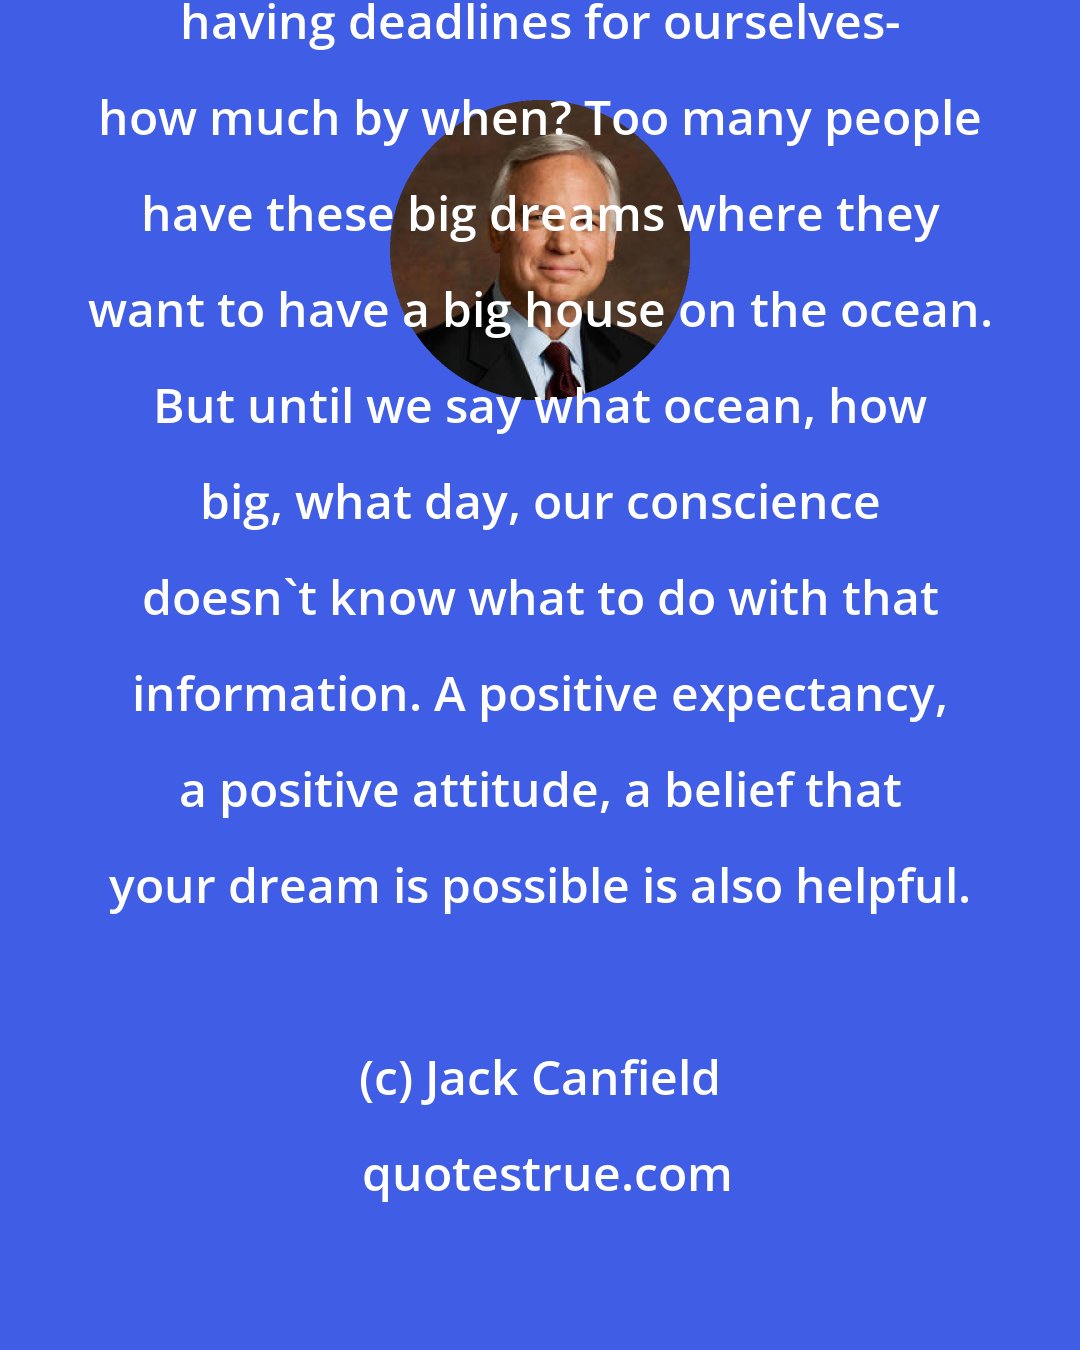 Jack Canfield: I think setting goals is critical; having deadlines for ourselves- how much by when? Too many people have these big dreams where they want to have a big house on the ocean. But until we say what ocean, how big, what day, our conscience doesn't know what to do with that information. A positive expectancy, a positive attitude, a belief that your dream is possible is also helpful.